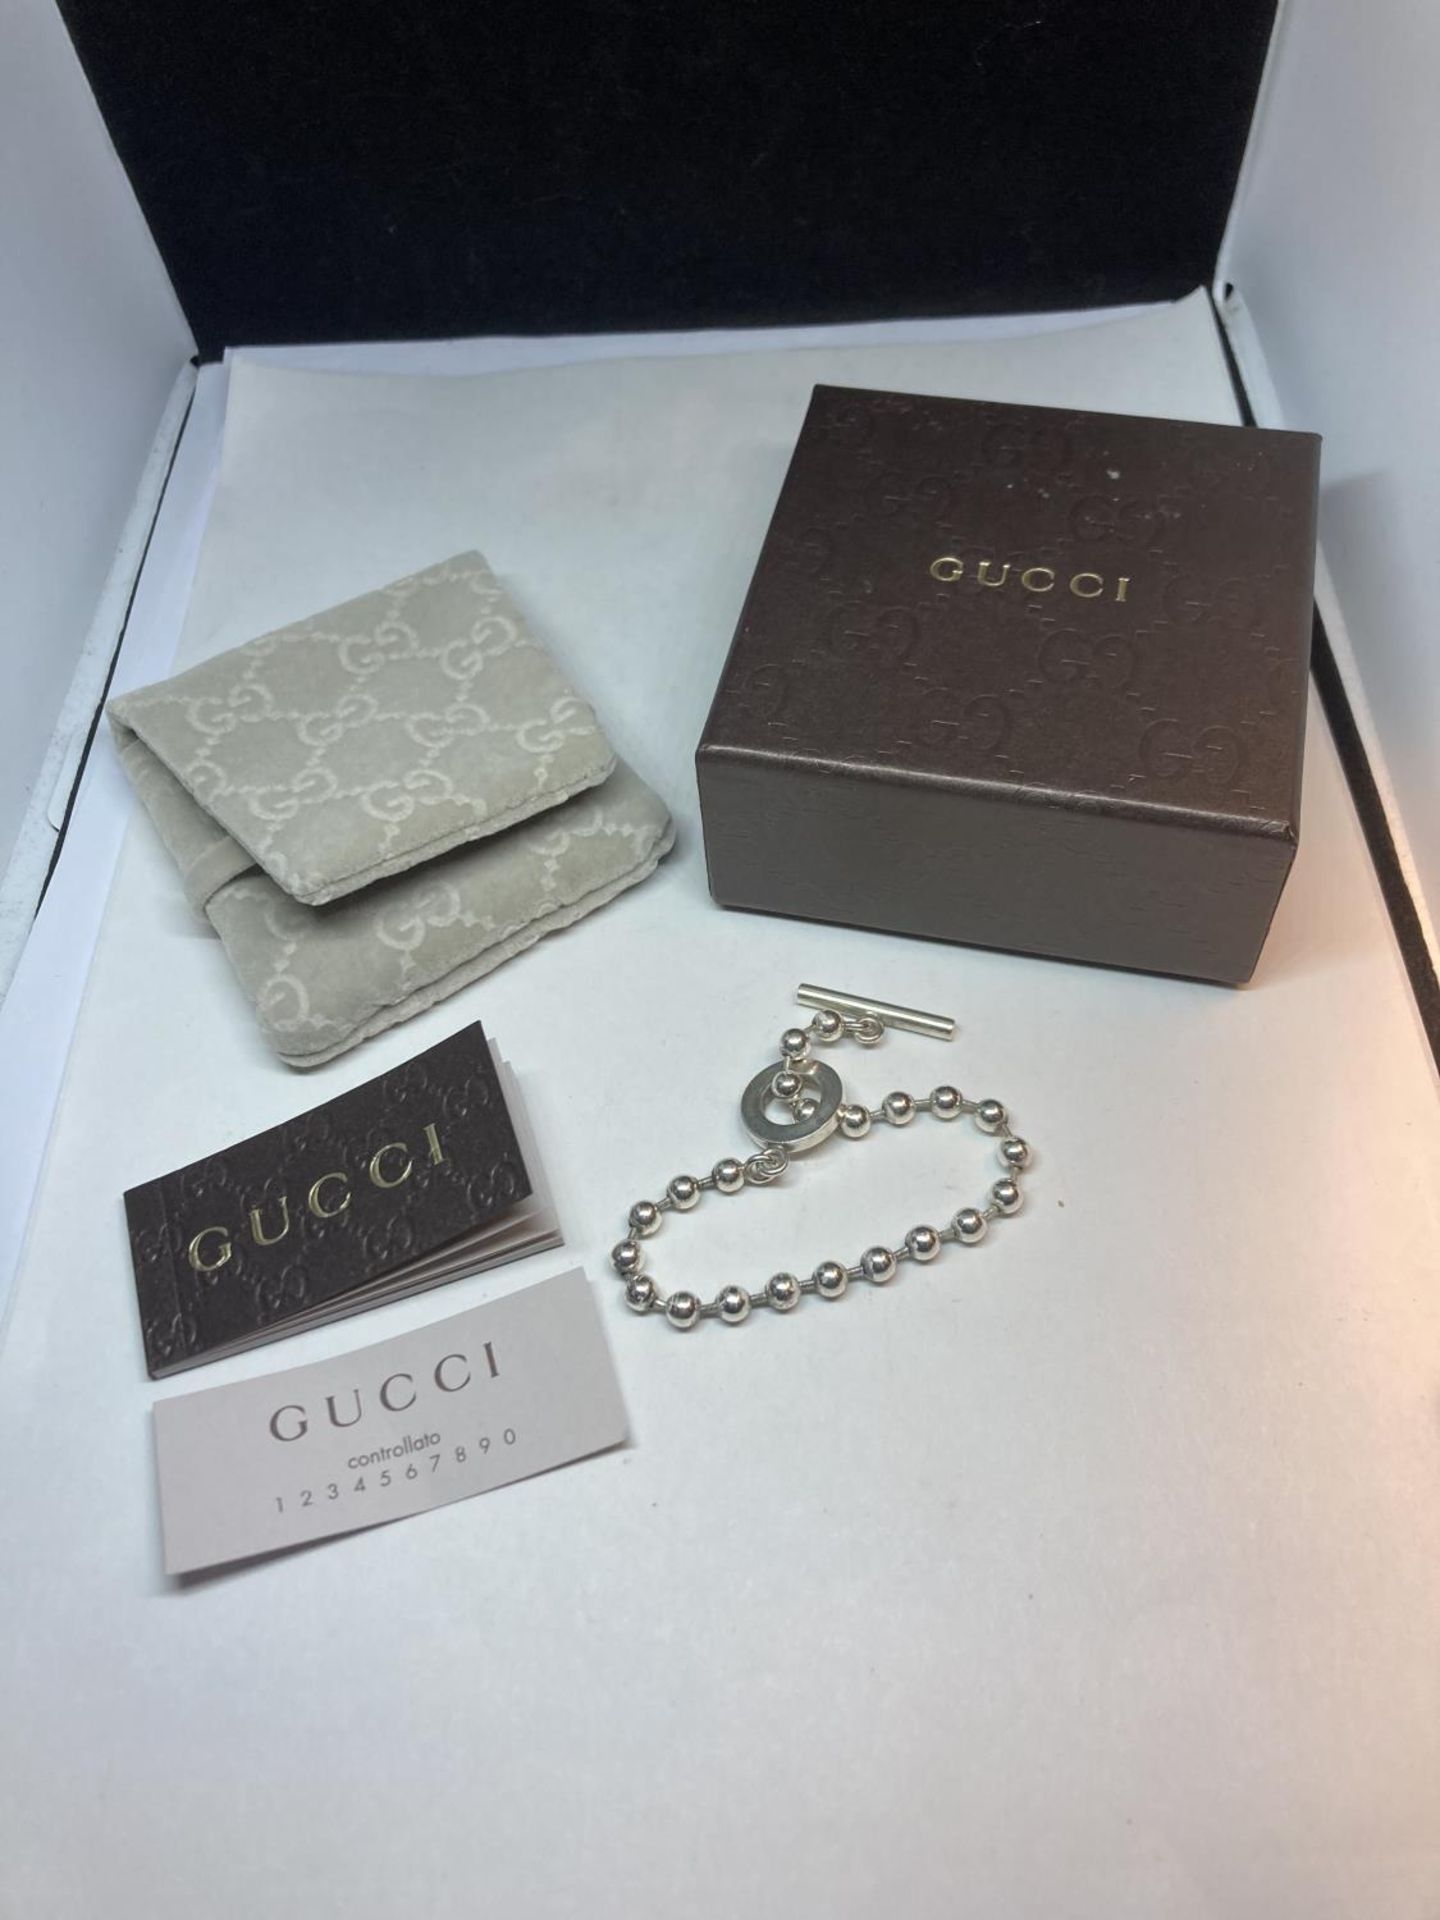 A GENUINE GUCCI SILVER BOULE CHAIN BRACELET APPROXIMATLY 18CM LONG IN ORIGINAL PRESENTATION BOX WITH